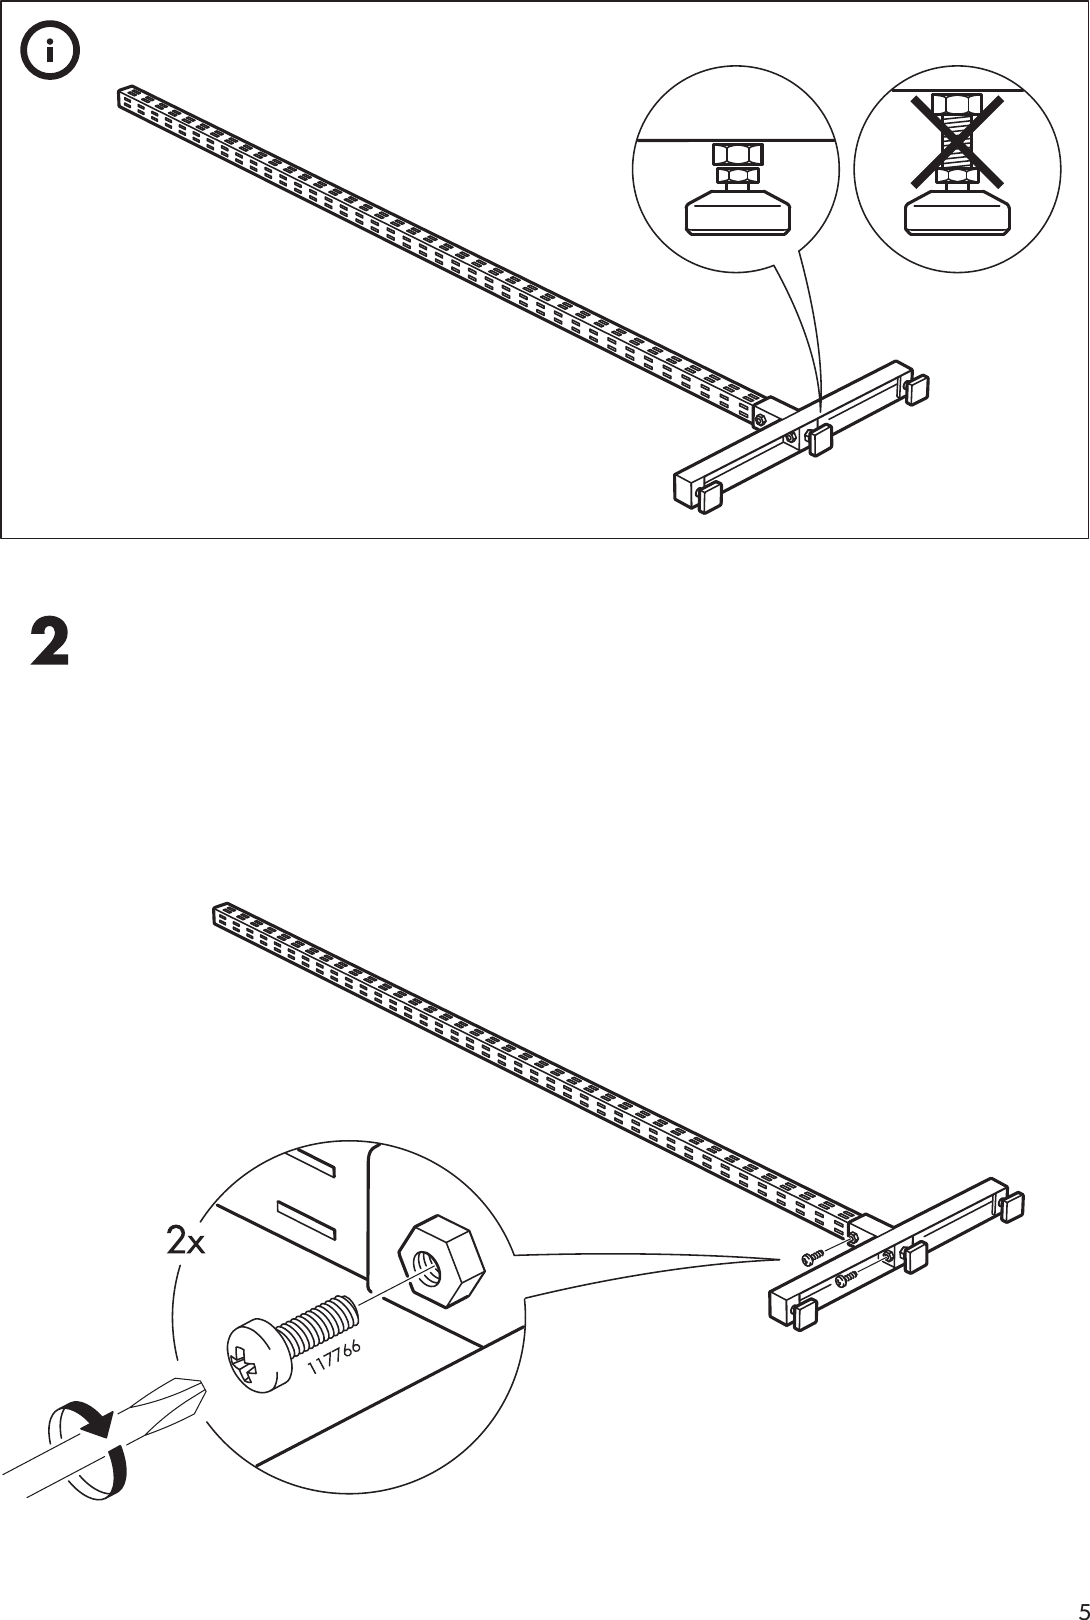 Page 5 of 12 - Ikea Ikea-Broder-T-Foot-Brace-23-Assembly-Instruction